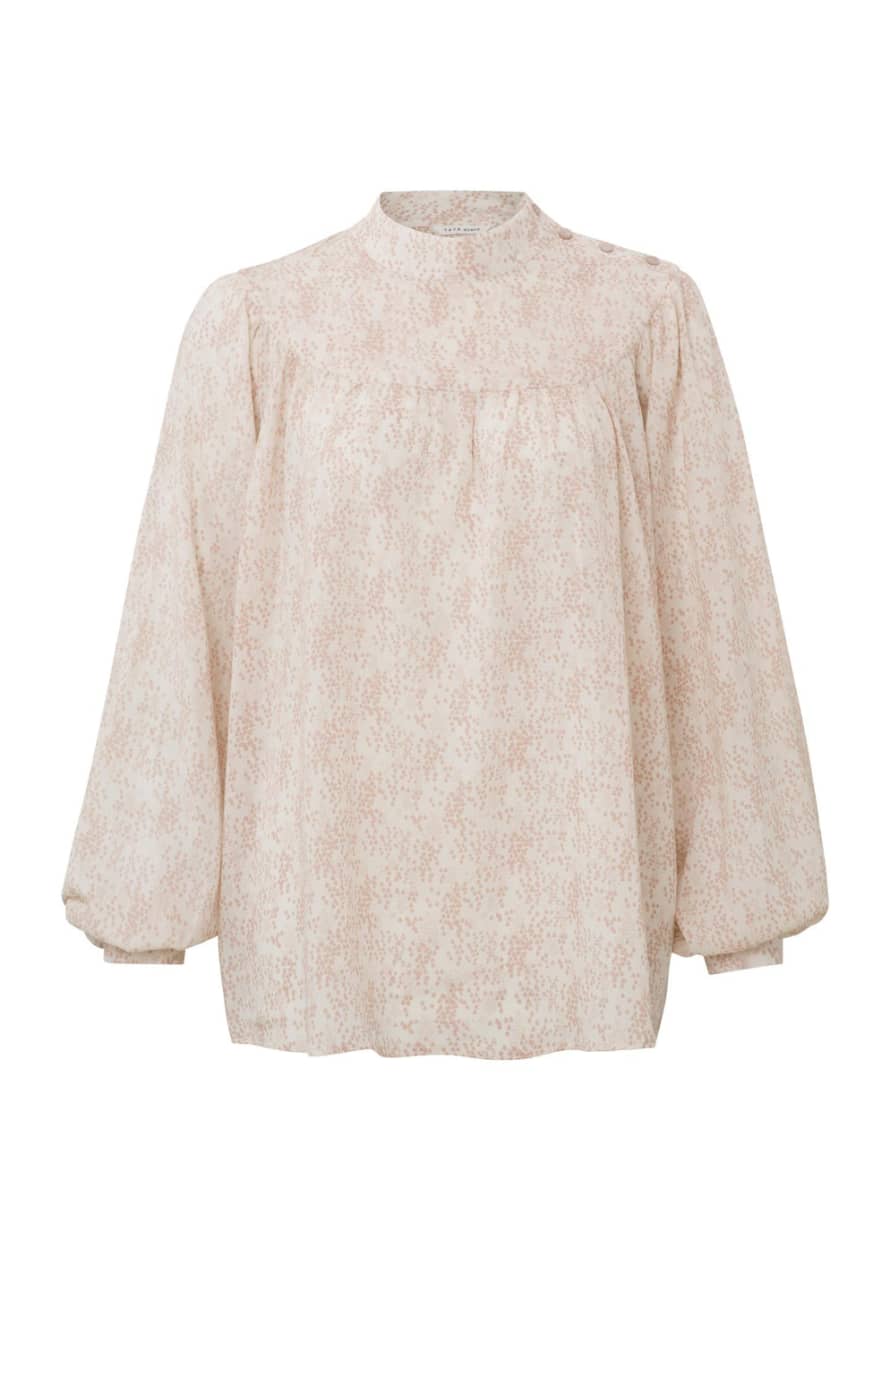 Yaya Birch Sand Blouse with High Neck and Balloon Sleeves